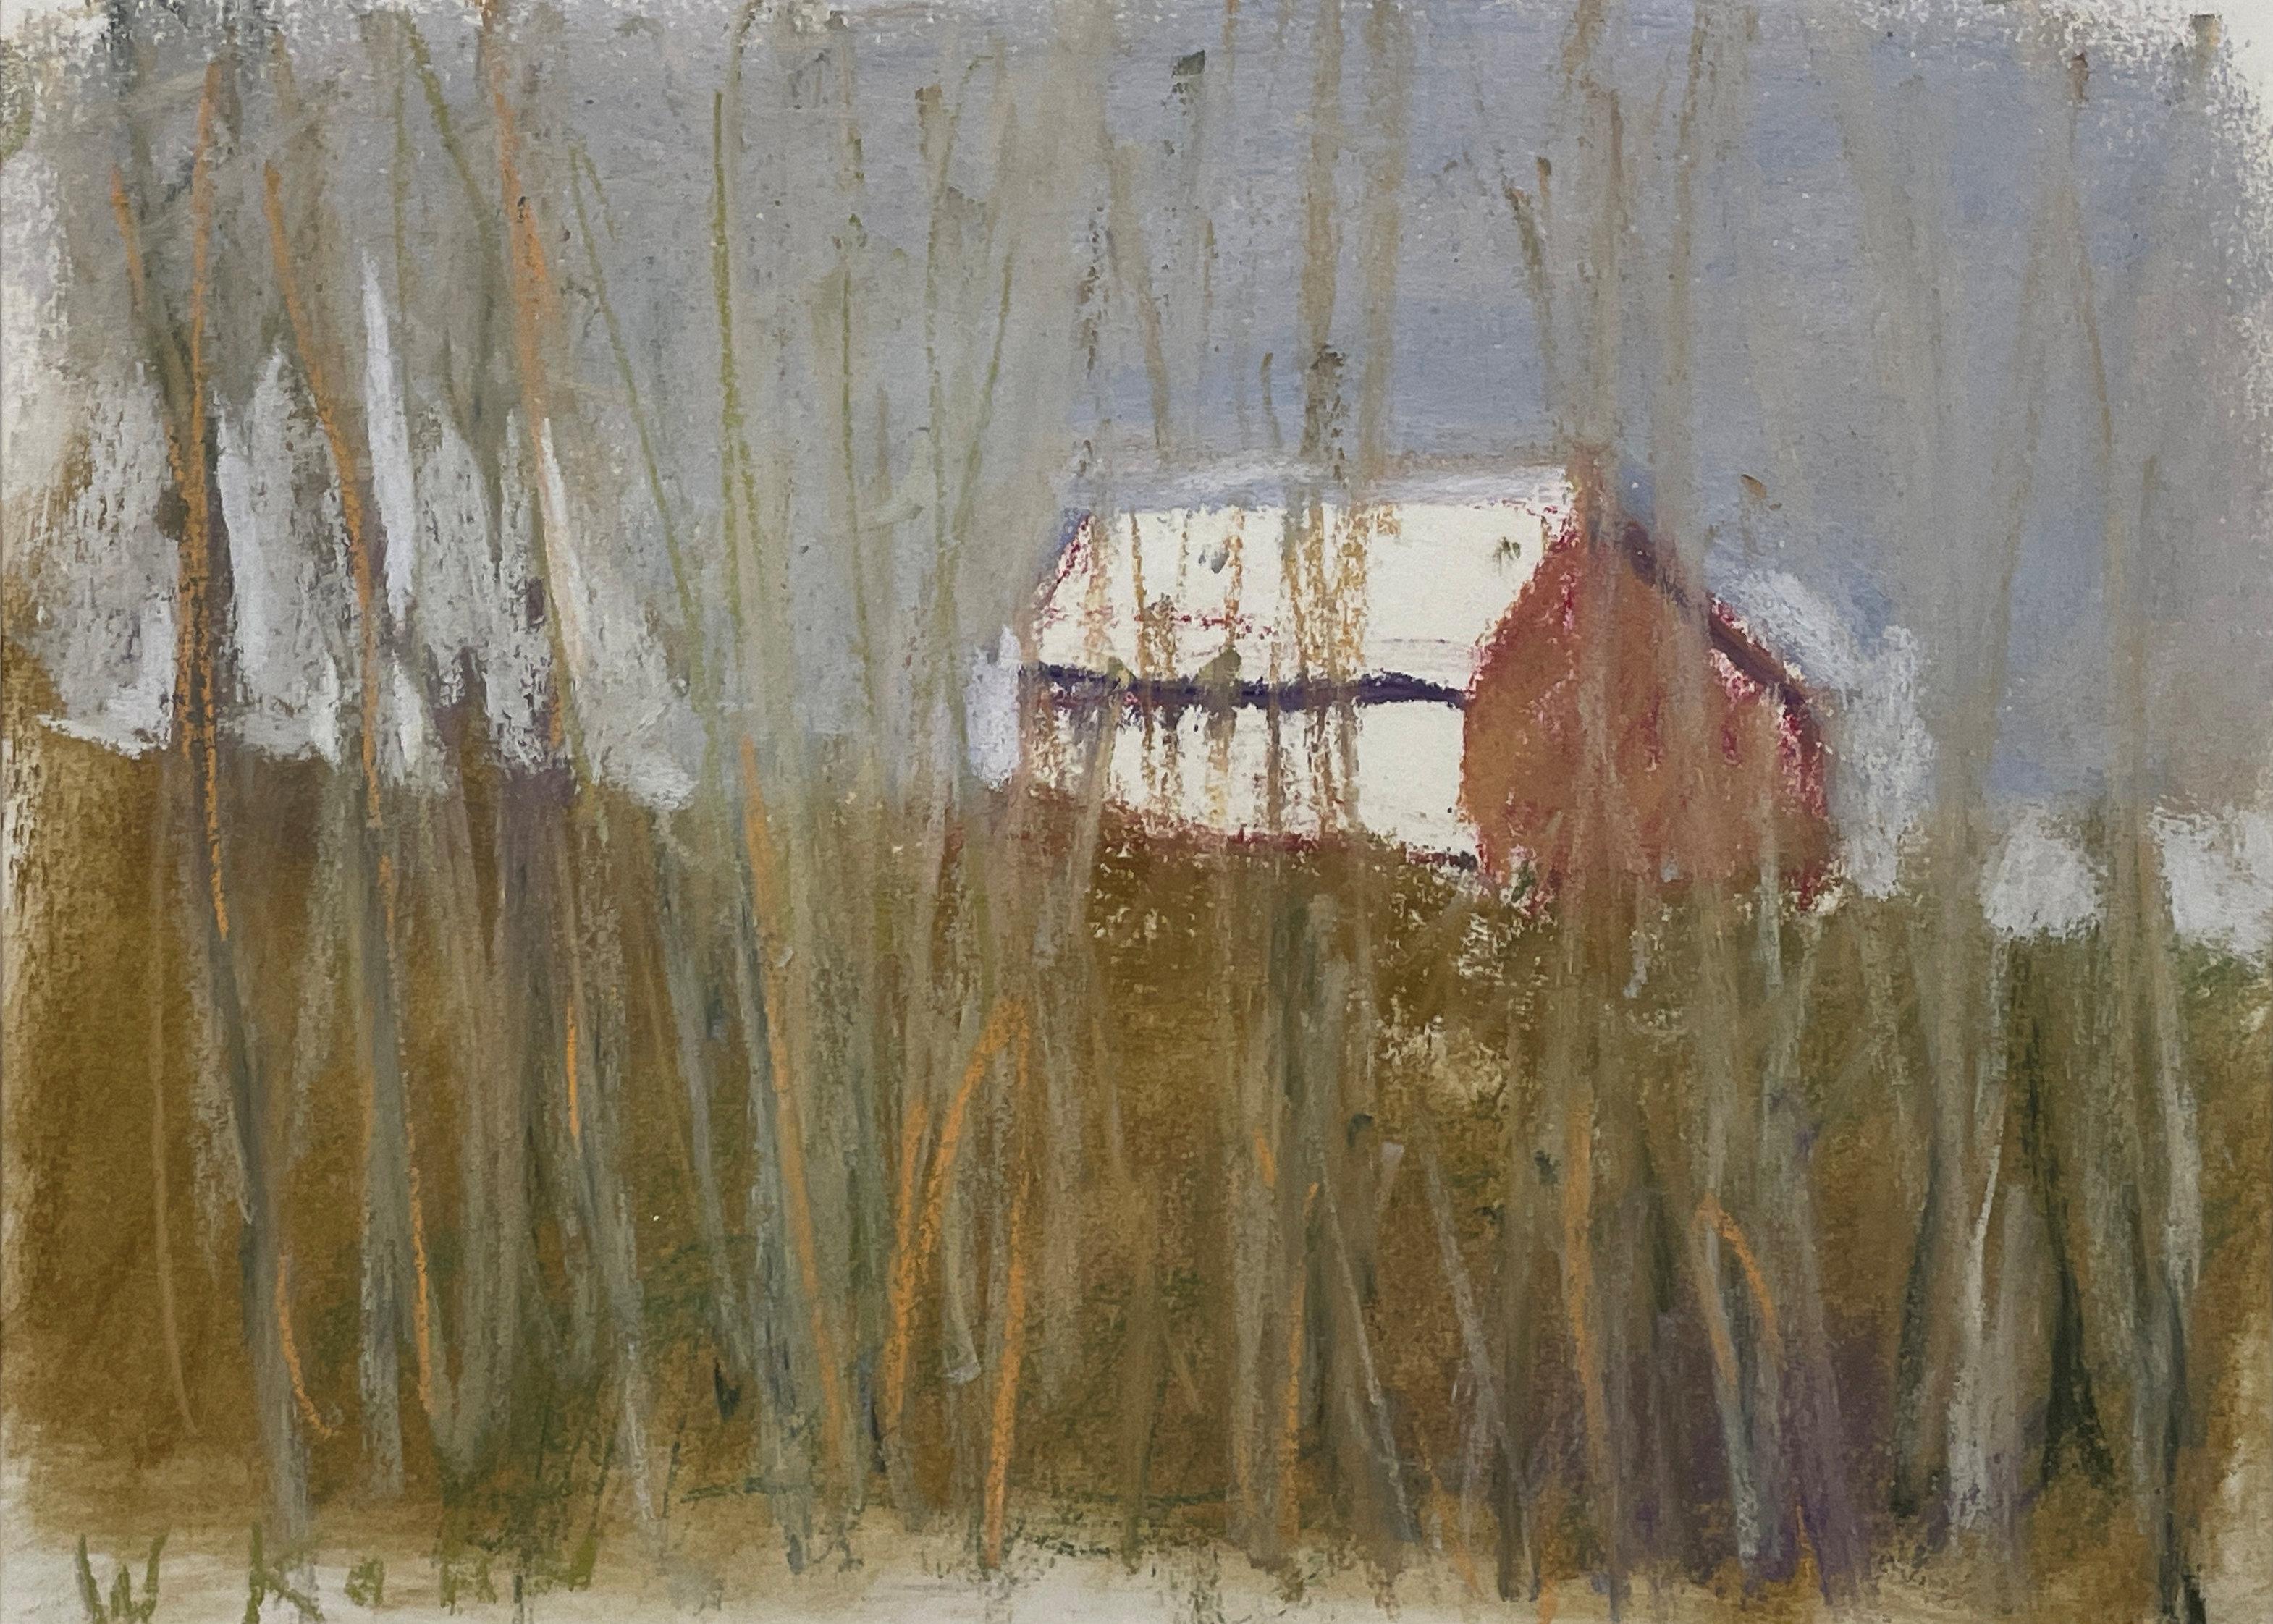 "Behind Reeds" Wolf Kahn, Vermont Marsh Landscape with Trees and Barn, Pastels